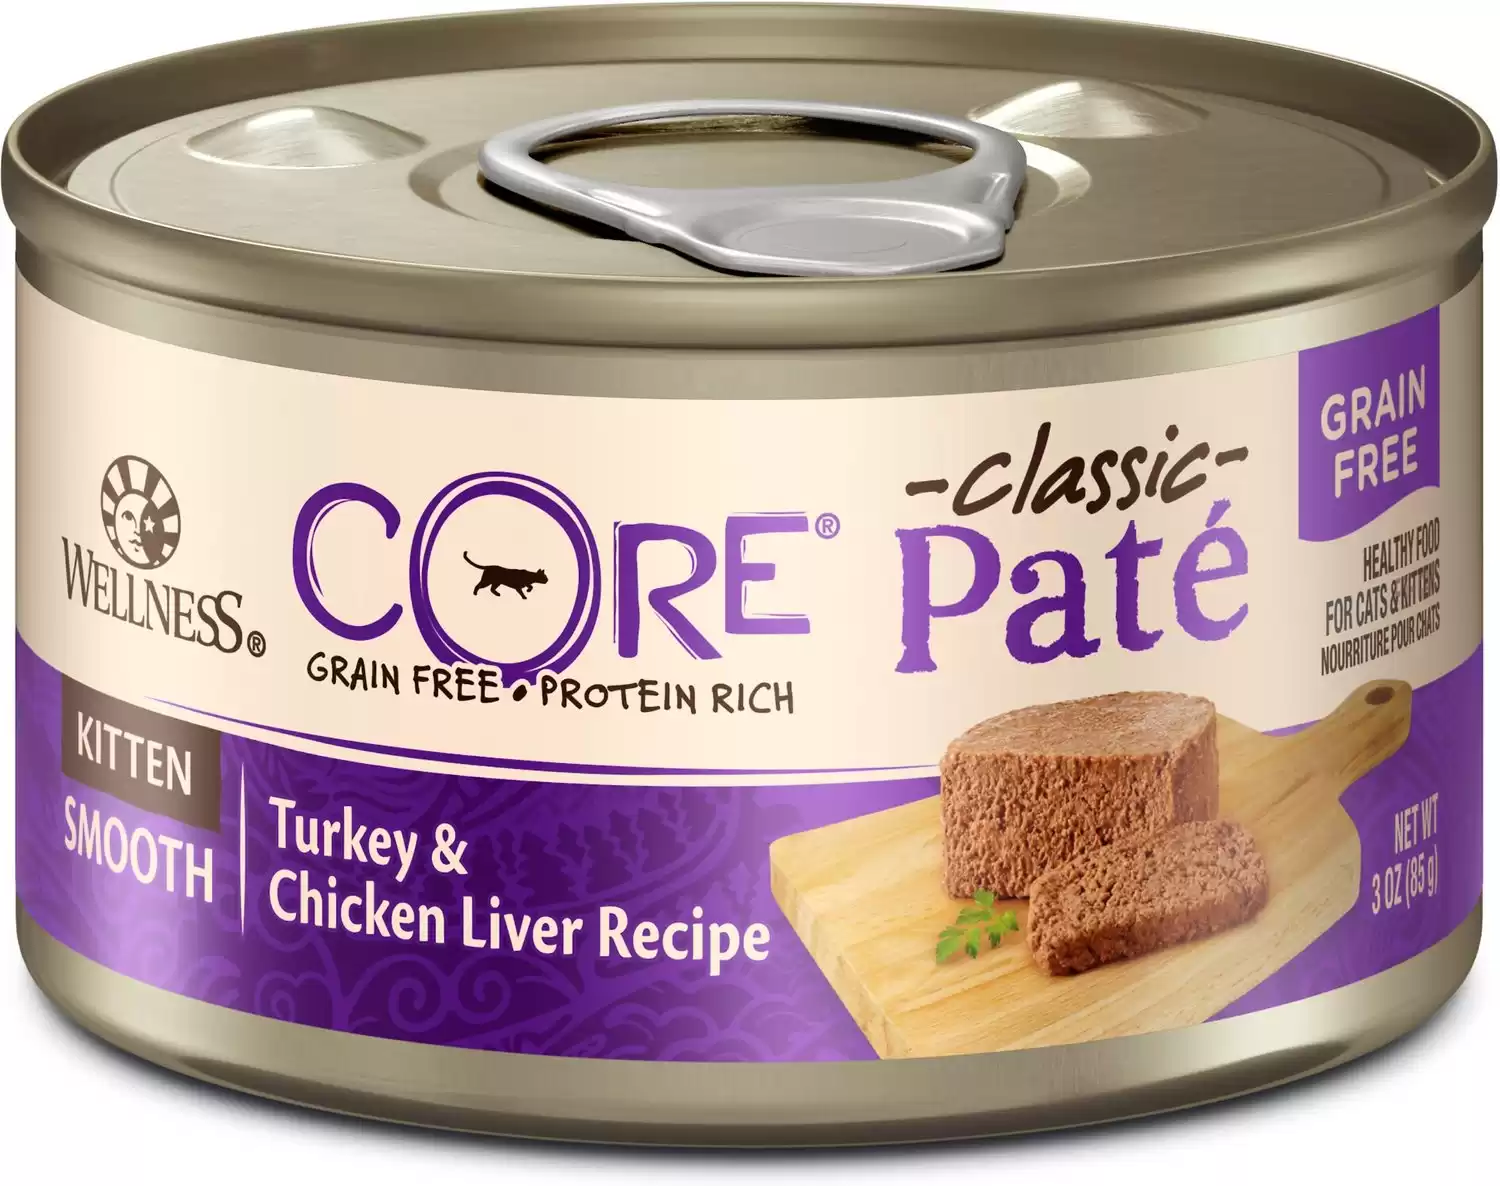 Wellness CORE Natural Grain-Free Turkey & Chicken Liver Pate Canned Kitten Food